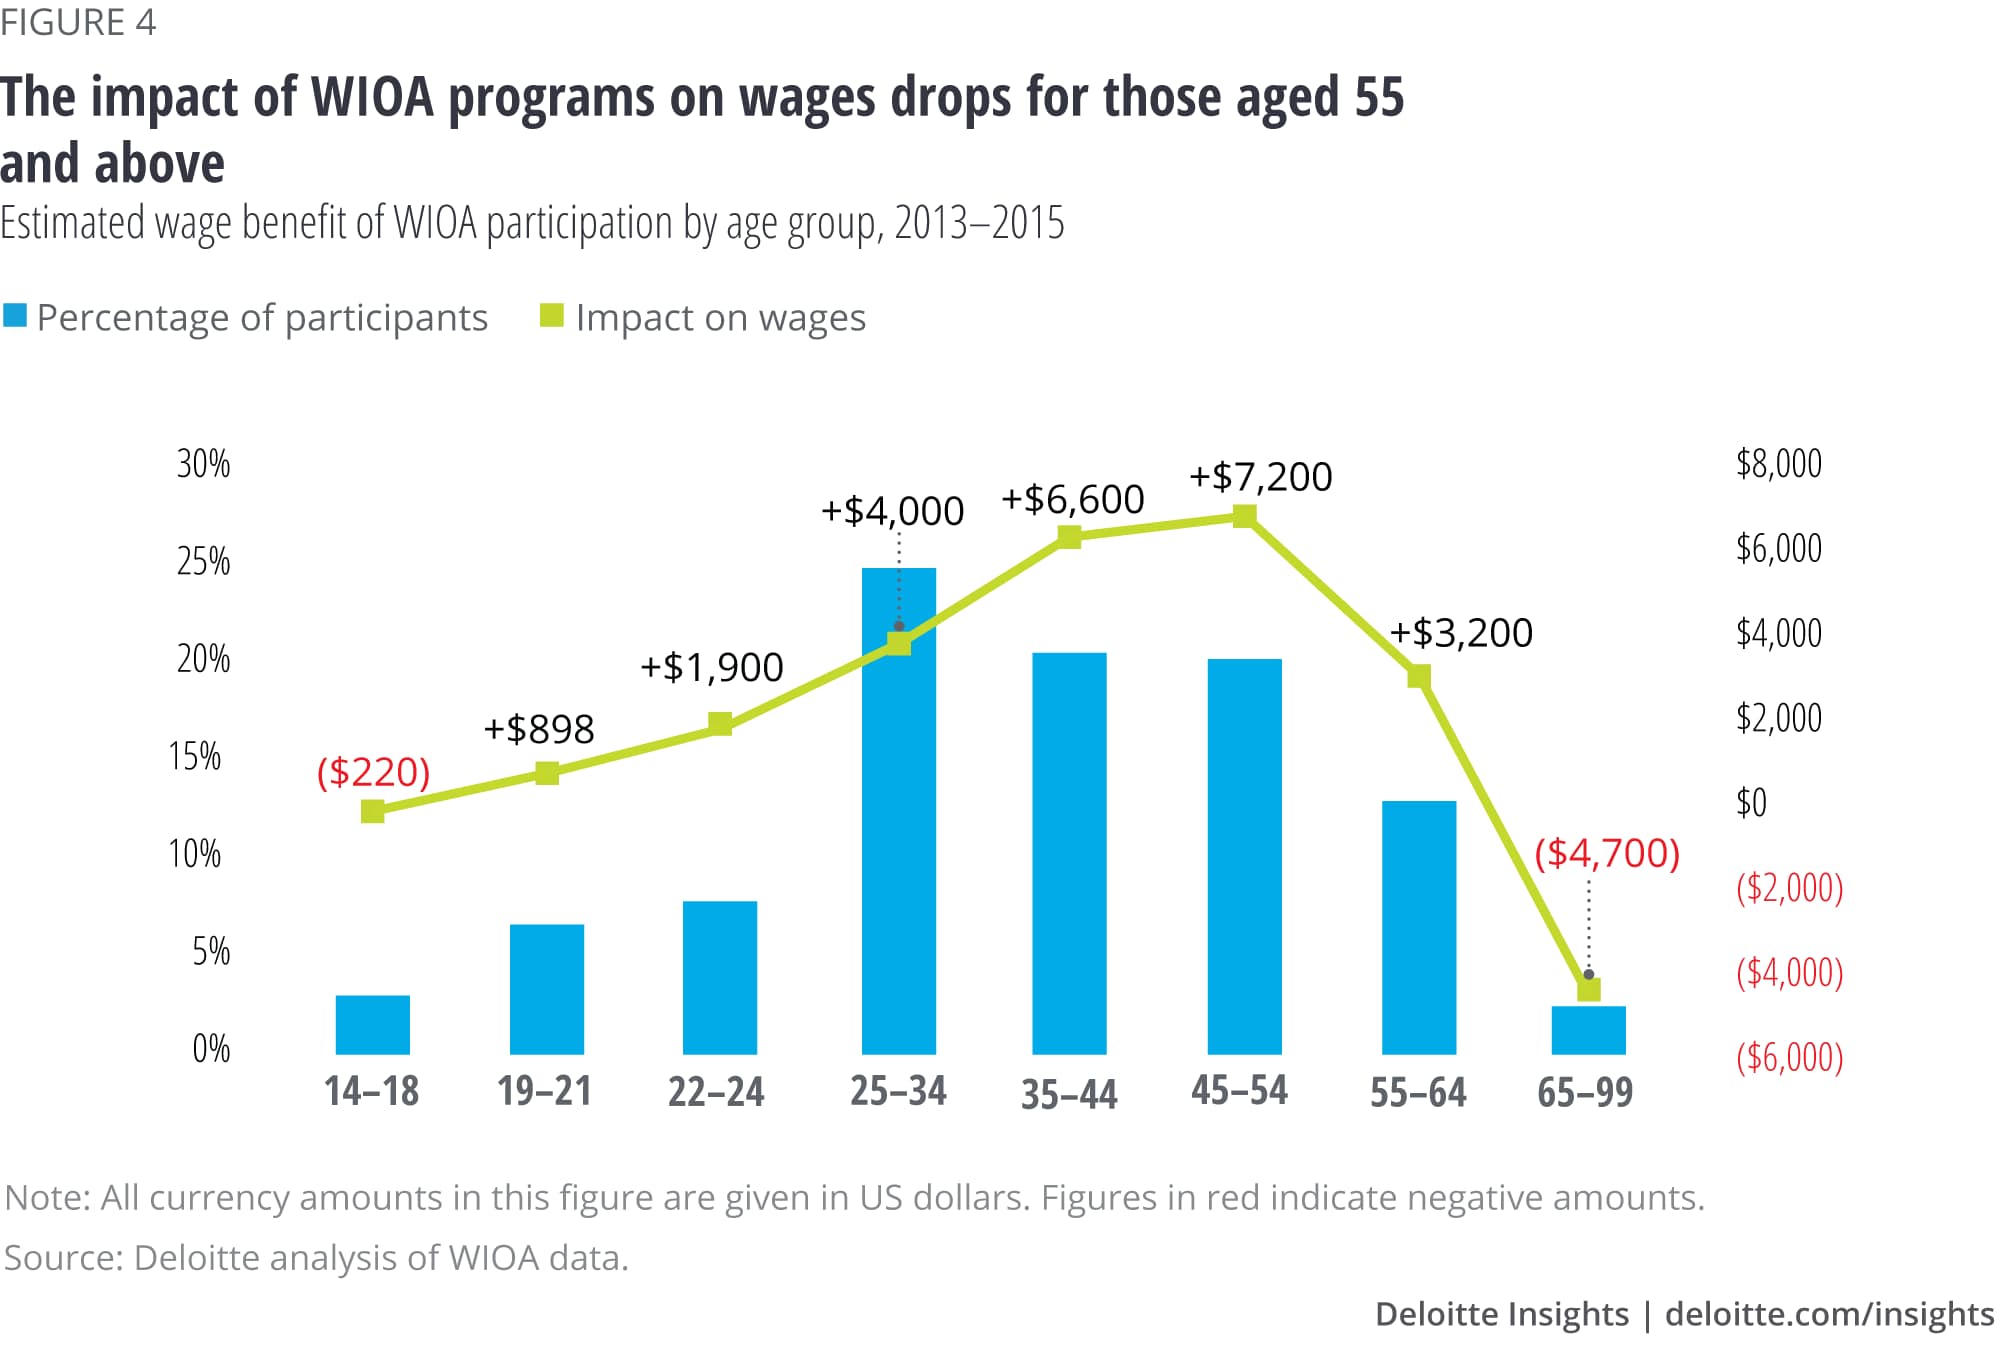 The impact of WIOA programs on wages drops for those aged 55 and above